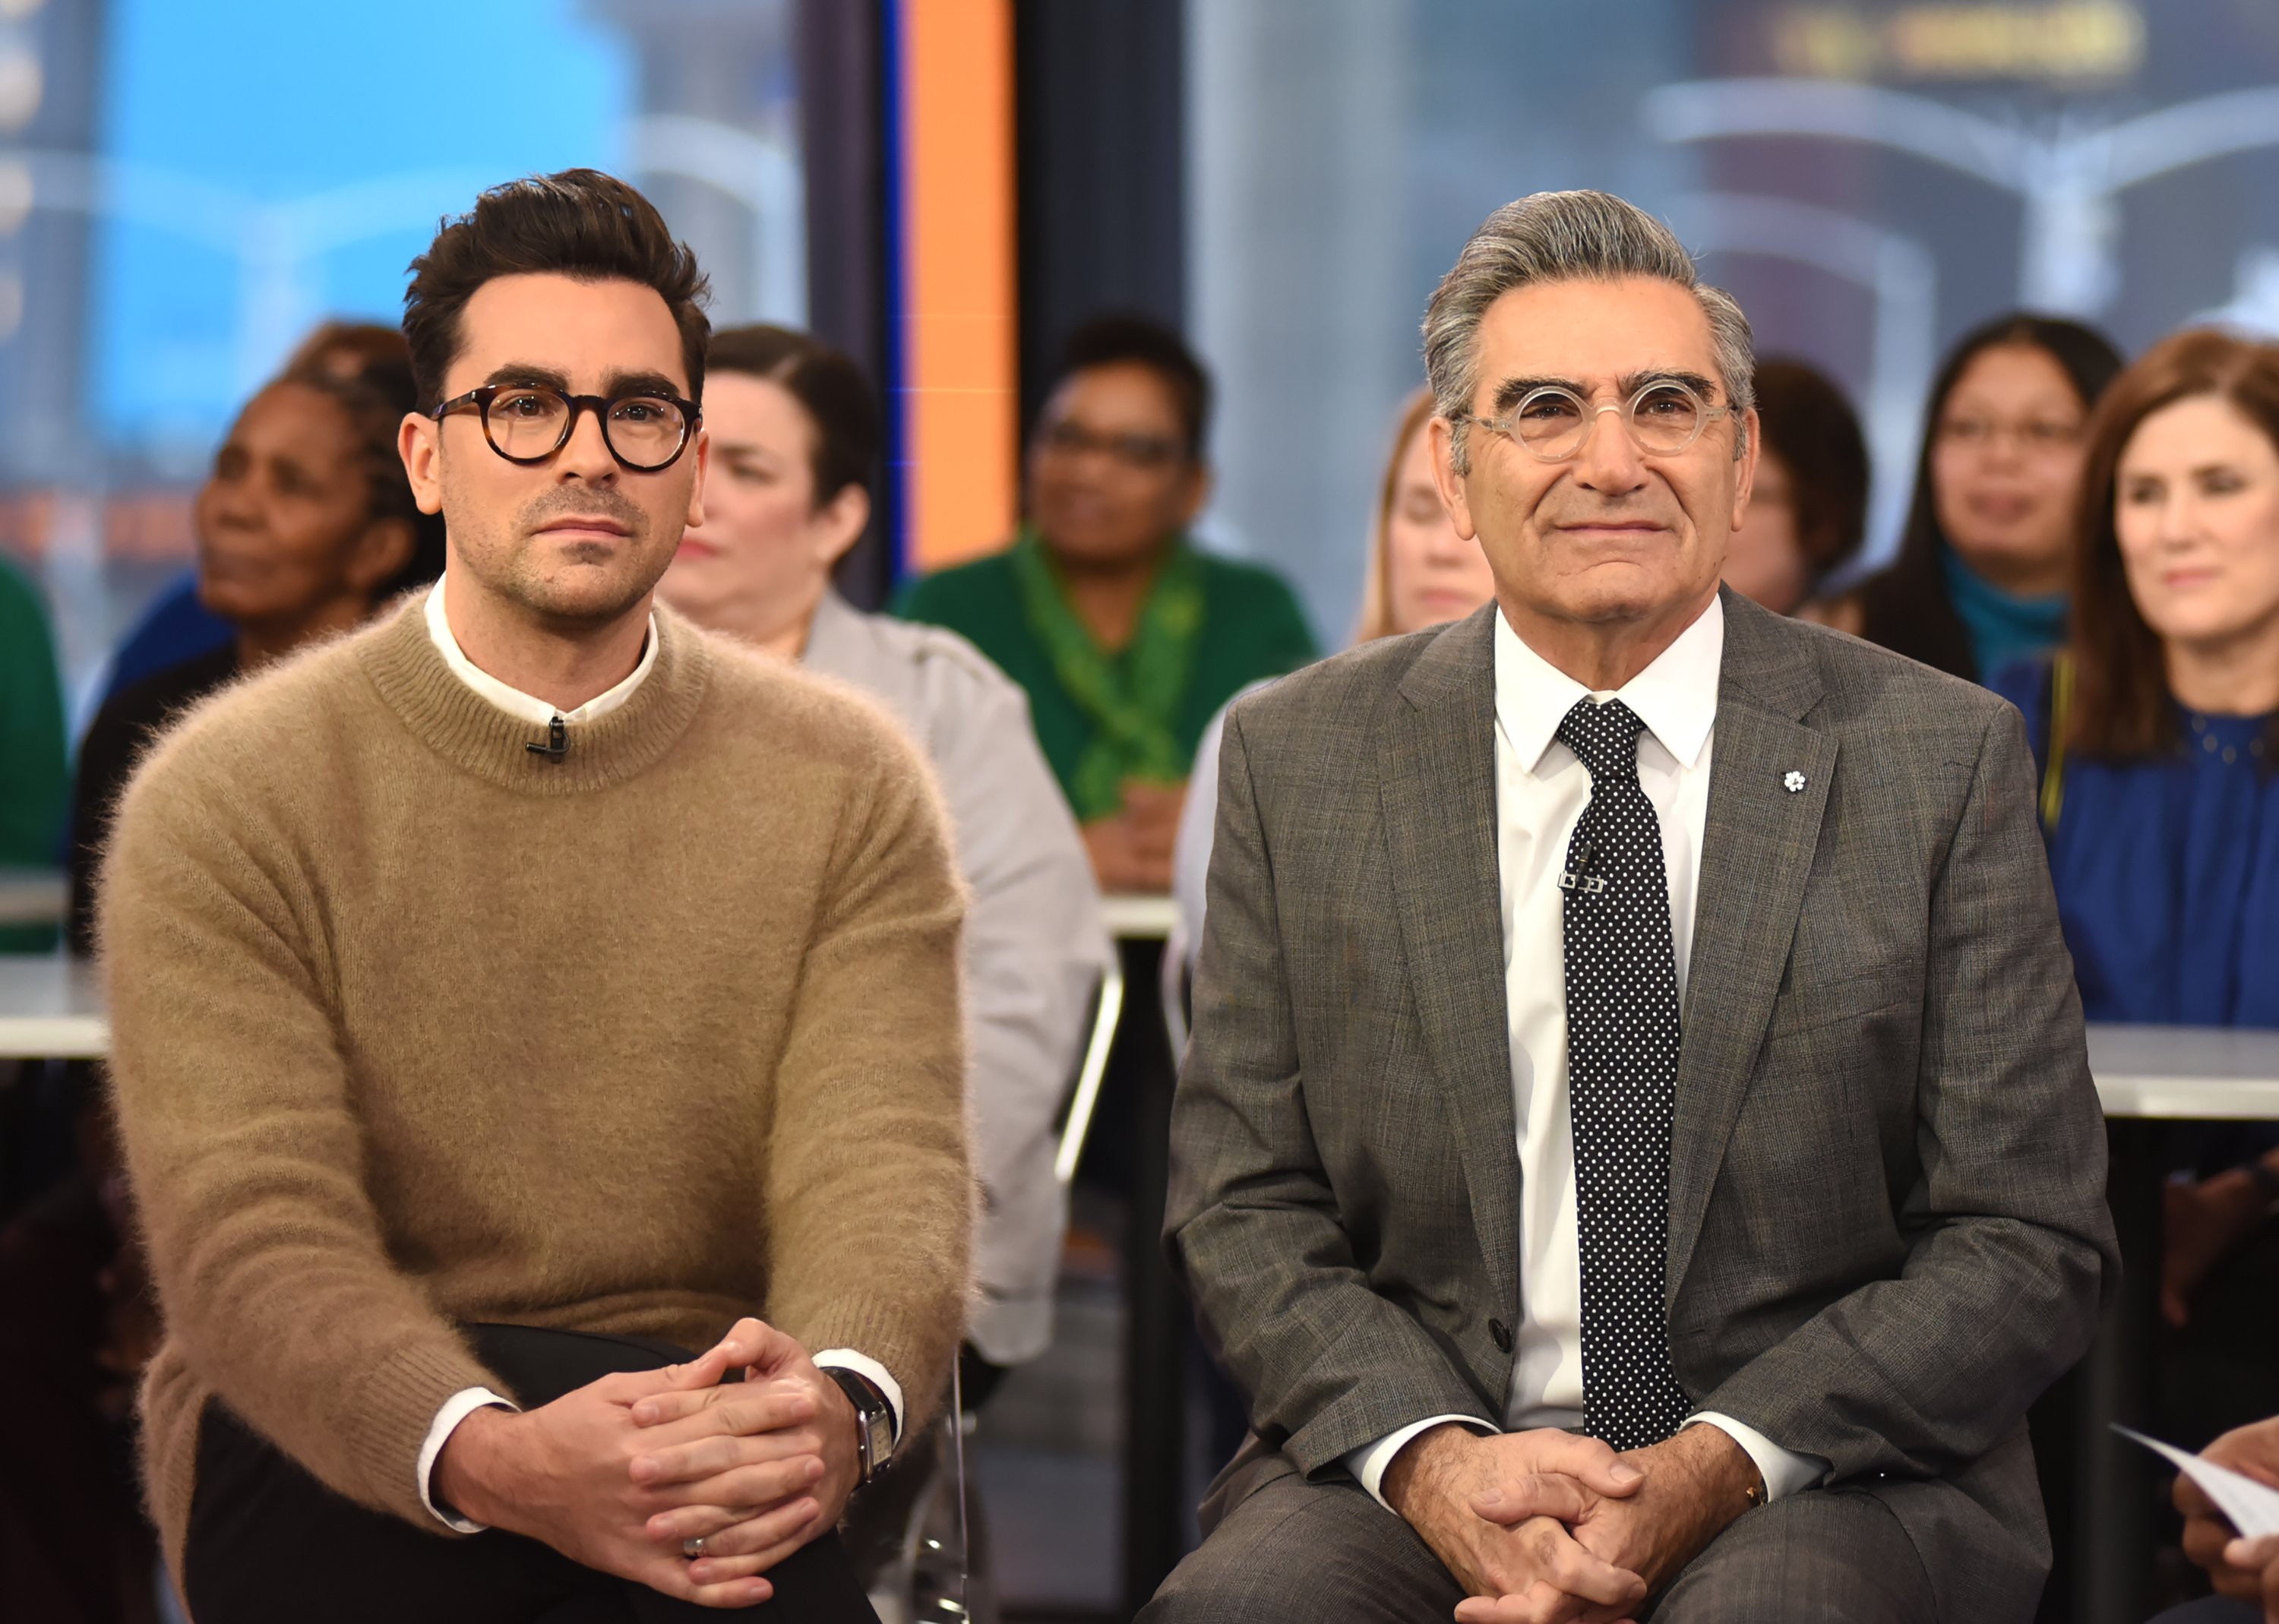 Eugene Levy and Dan Levy visit "Good Morning America" on January 24, 2018 | Photo: Getty Images